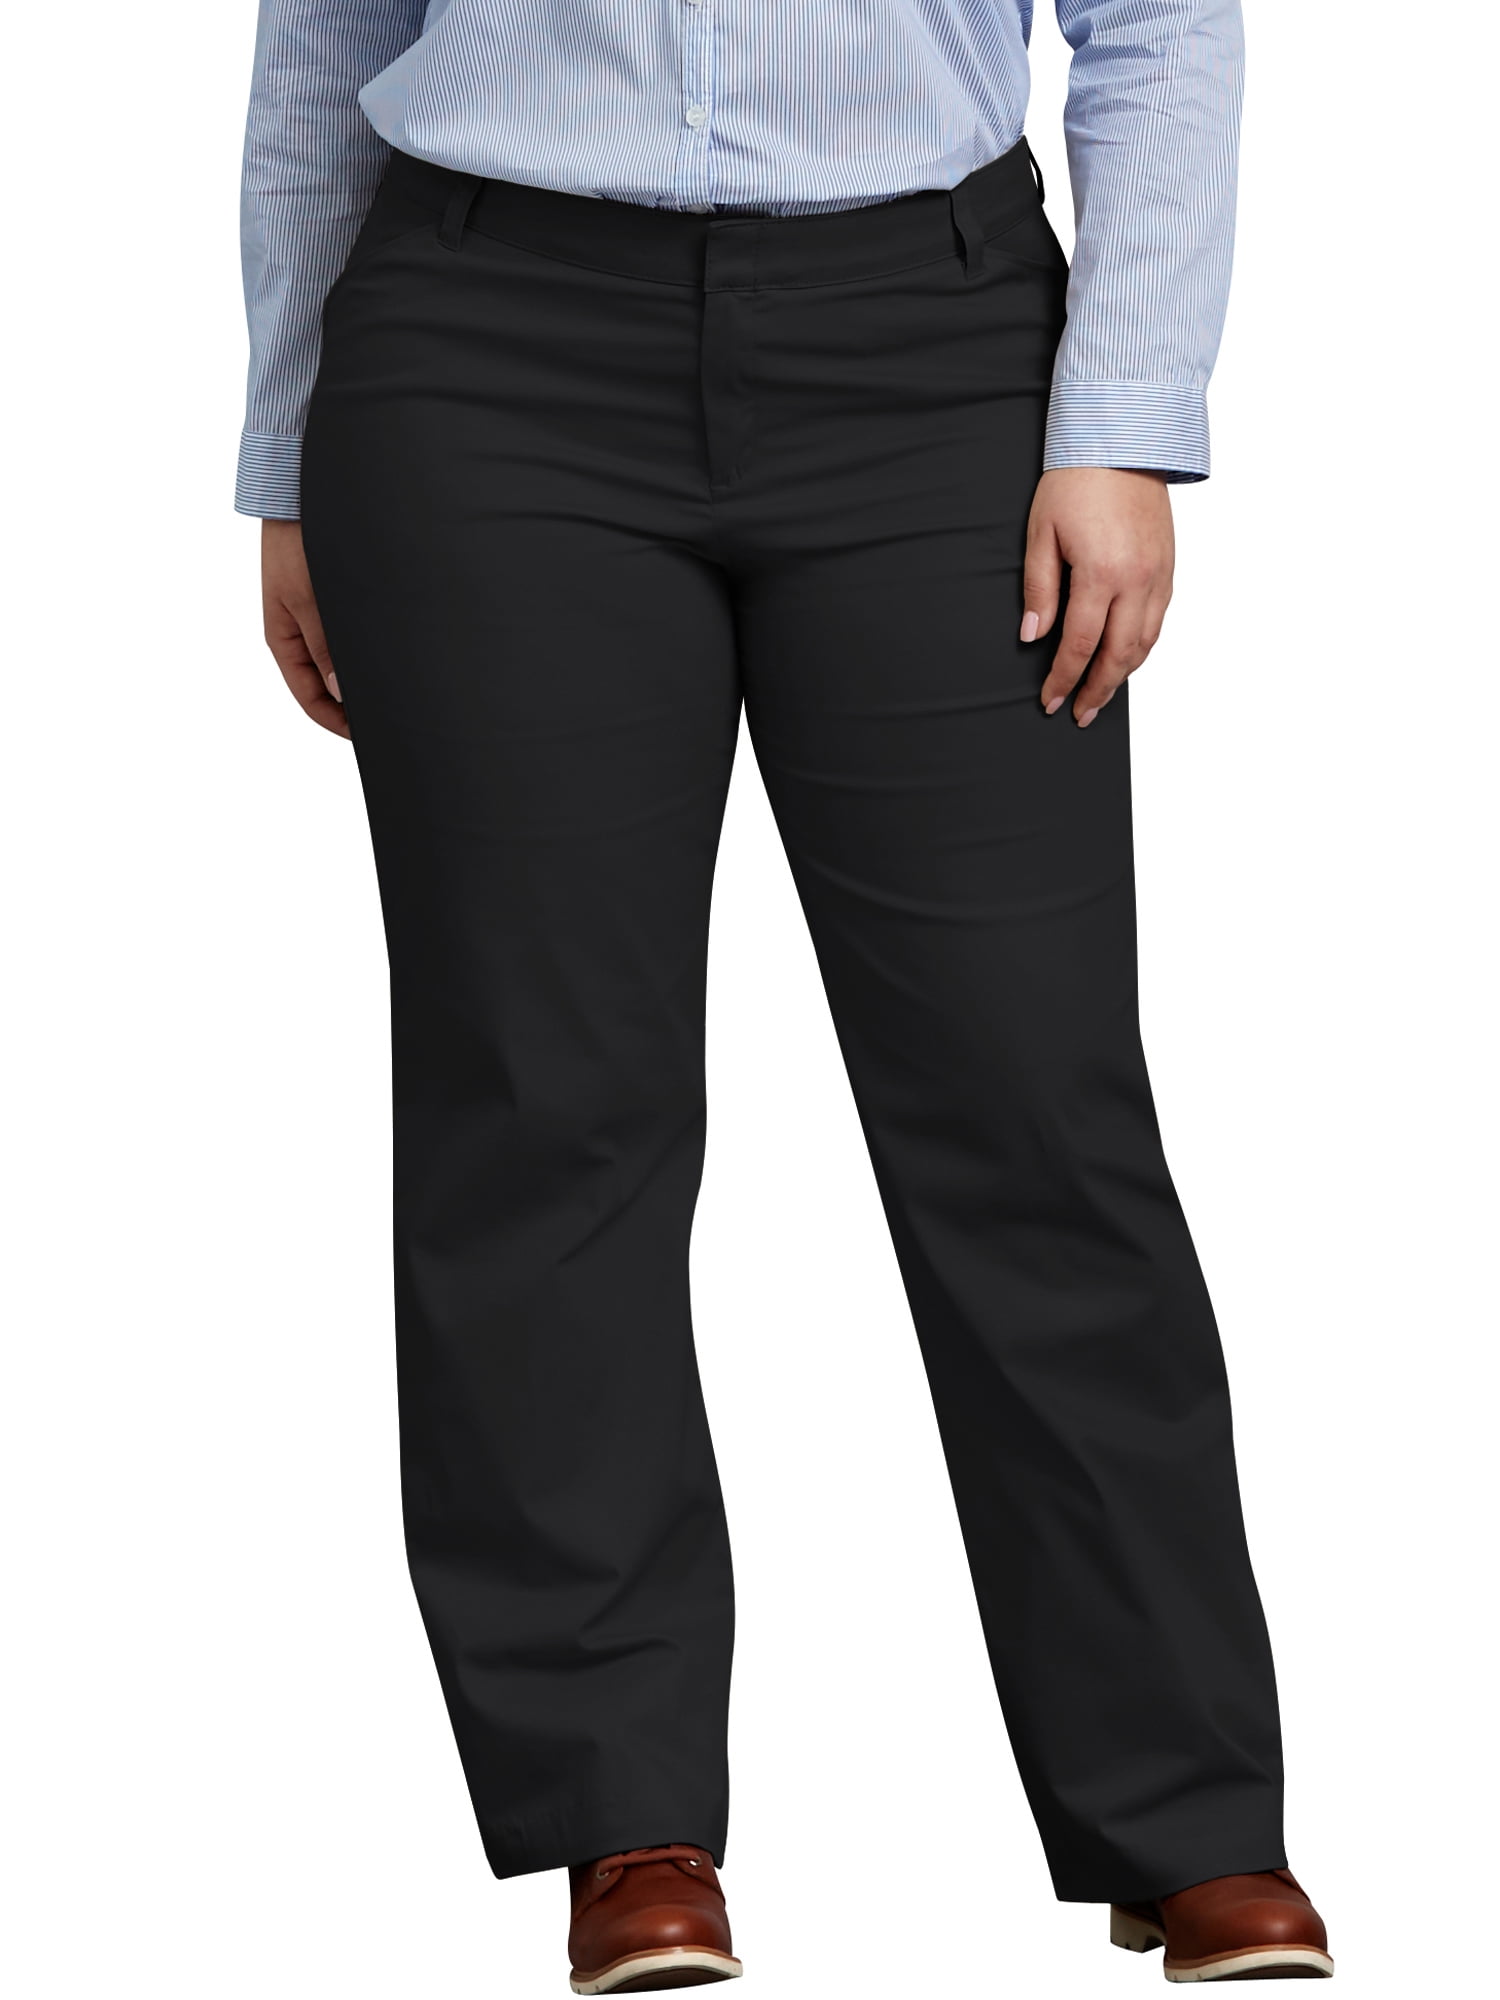 Dickies Womens Mid-Rise Skinny Stretch Twill Pant 